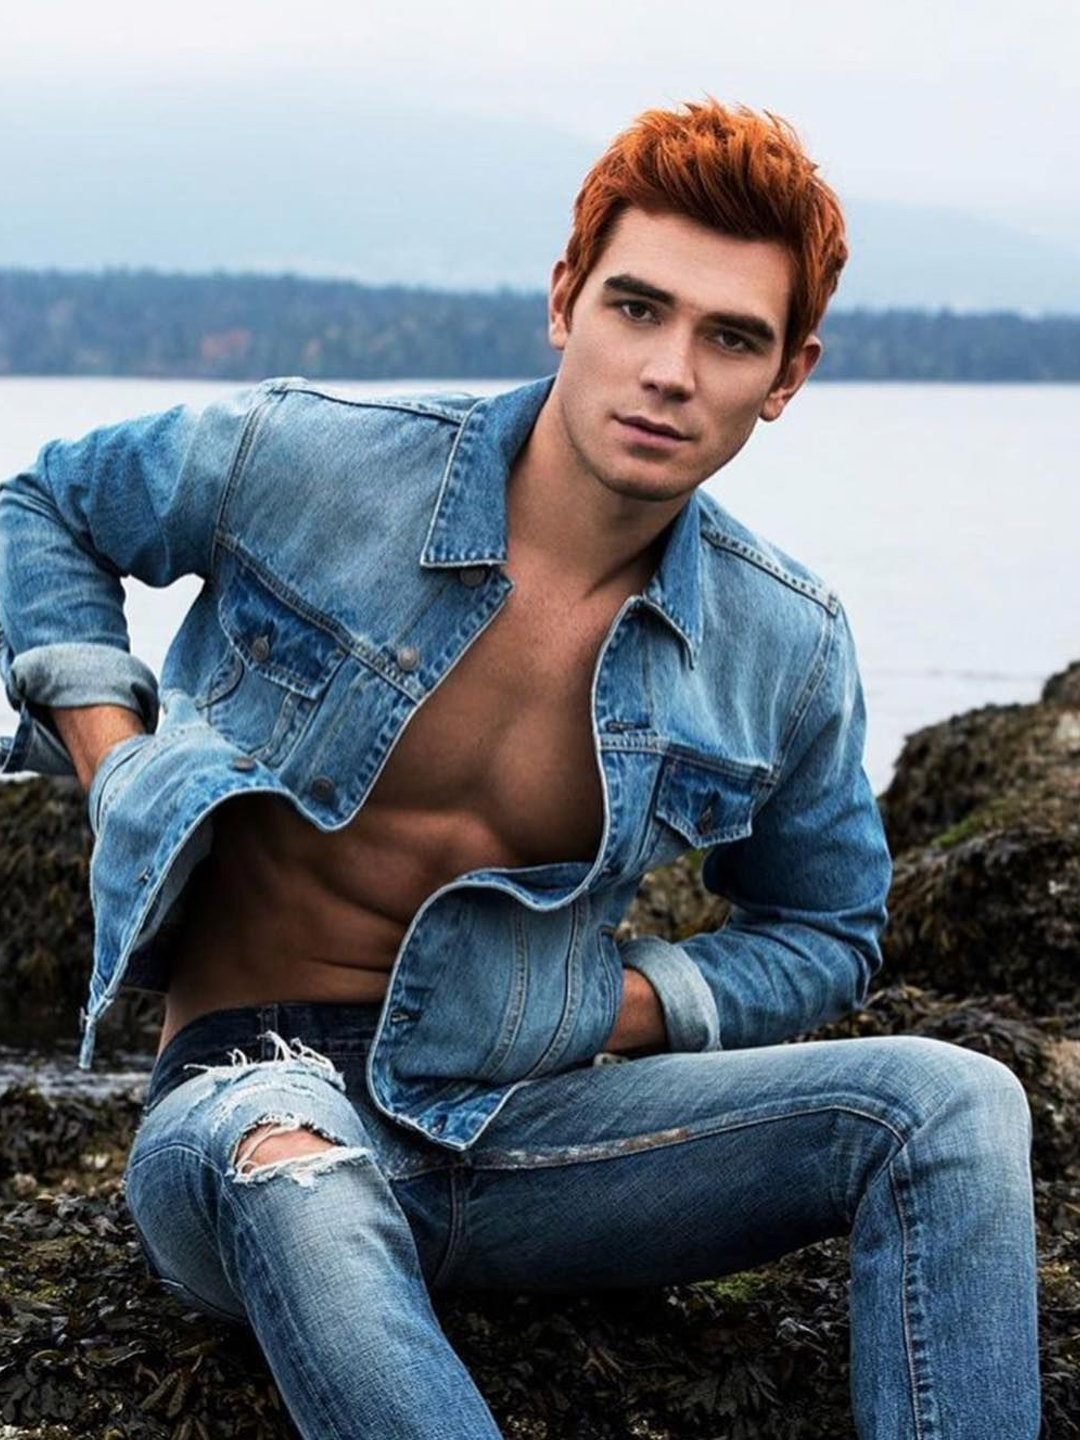 KJ Apa who is his mother